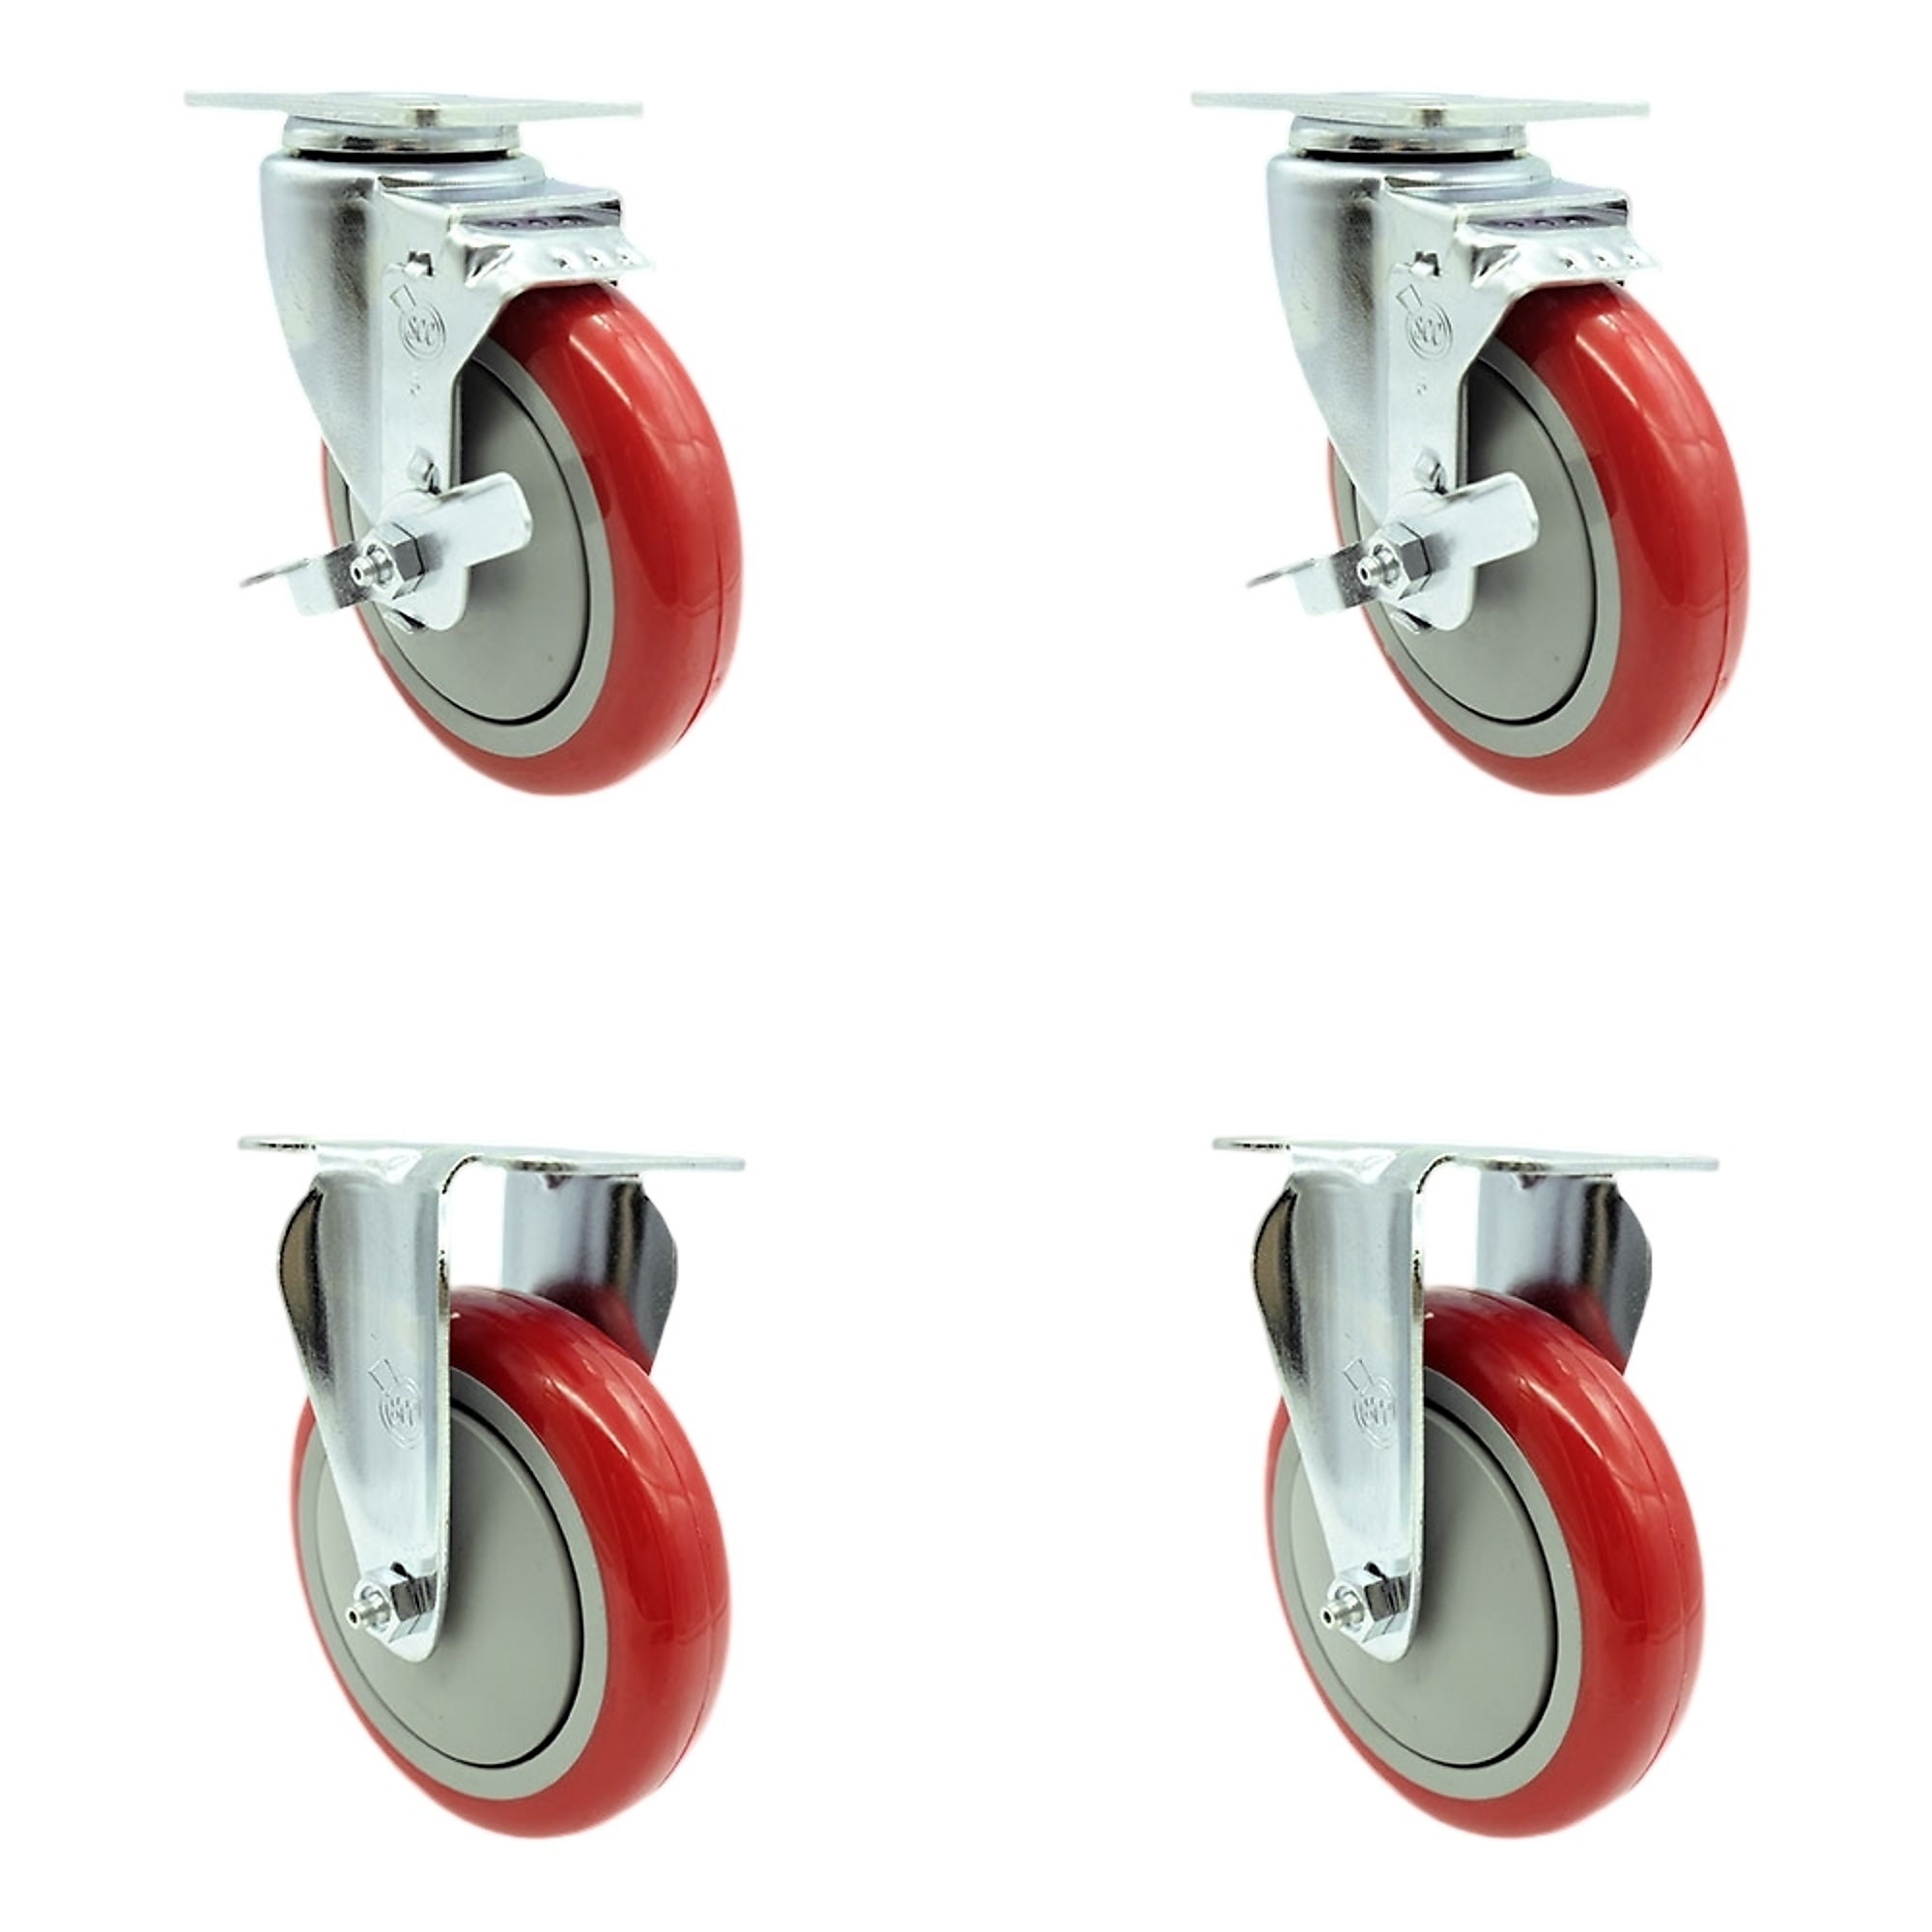 5Inch x 1 1/4Inch Plate Casters, Wheel Diameter 5 in, Caster Type Swivel, Package (qty.) 4, Model - Service Caster SCC-20S514-PPUB-RED-TLB-2-R514-2